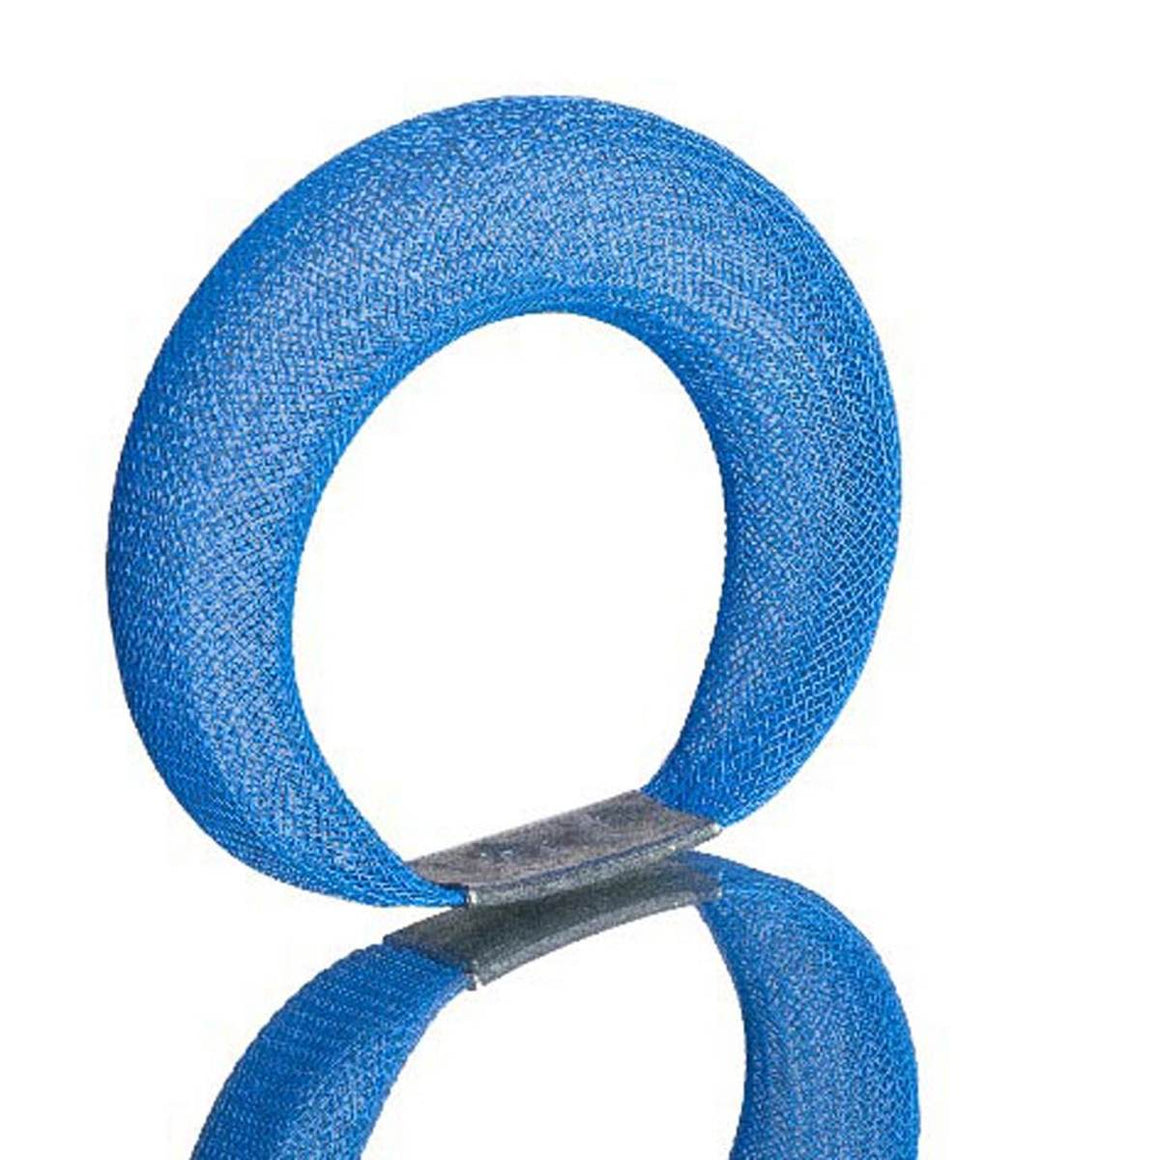 A Blue bracelet made from finely woven nylon mesh